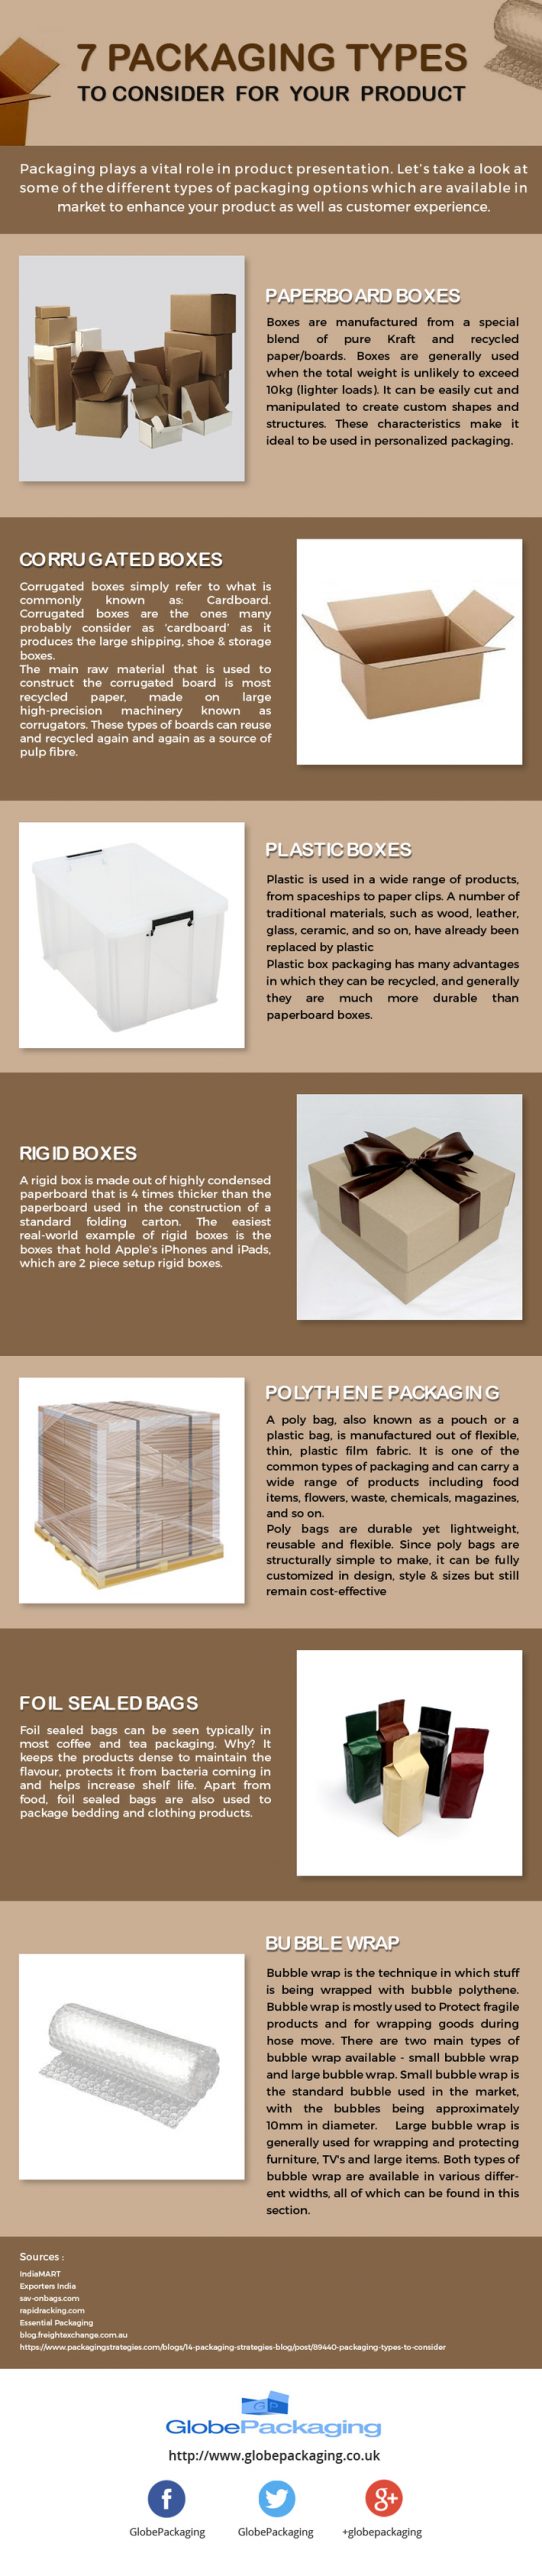 10 Different Types of Packaging Materials You Should Know